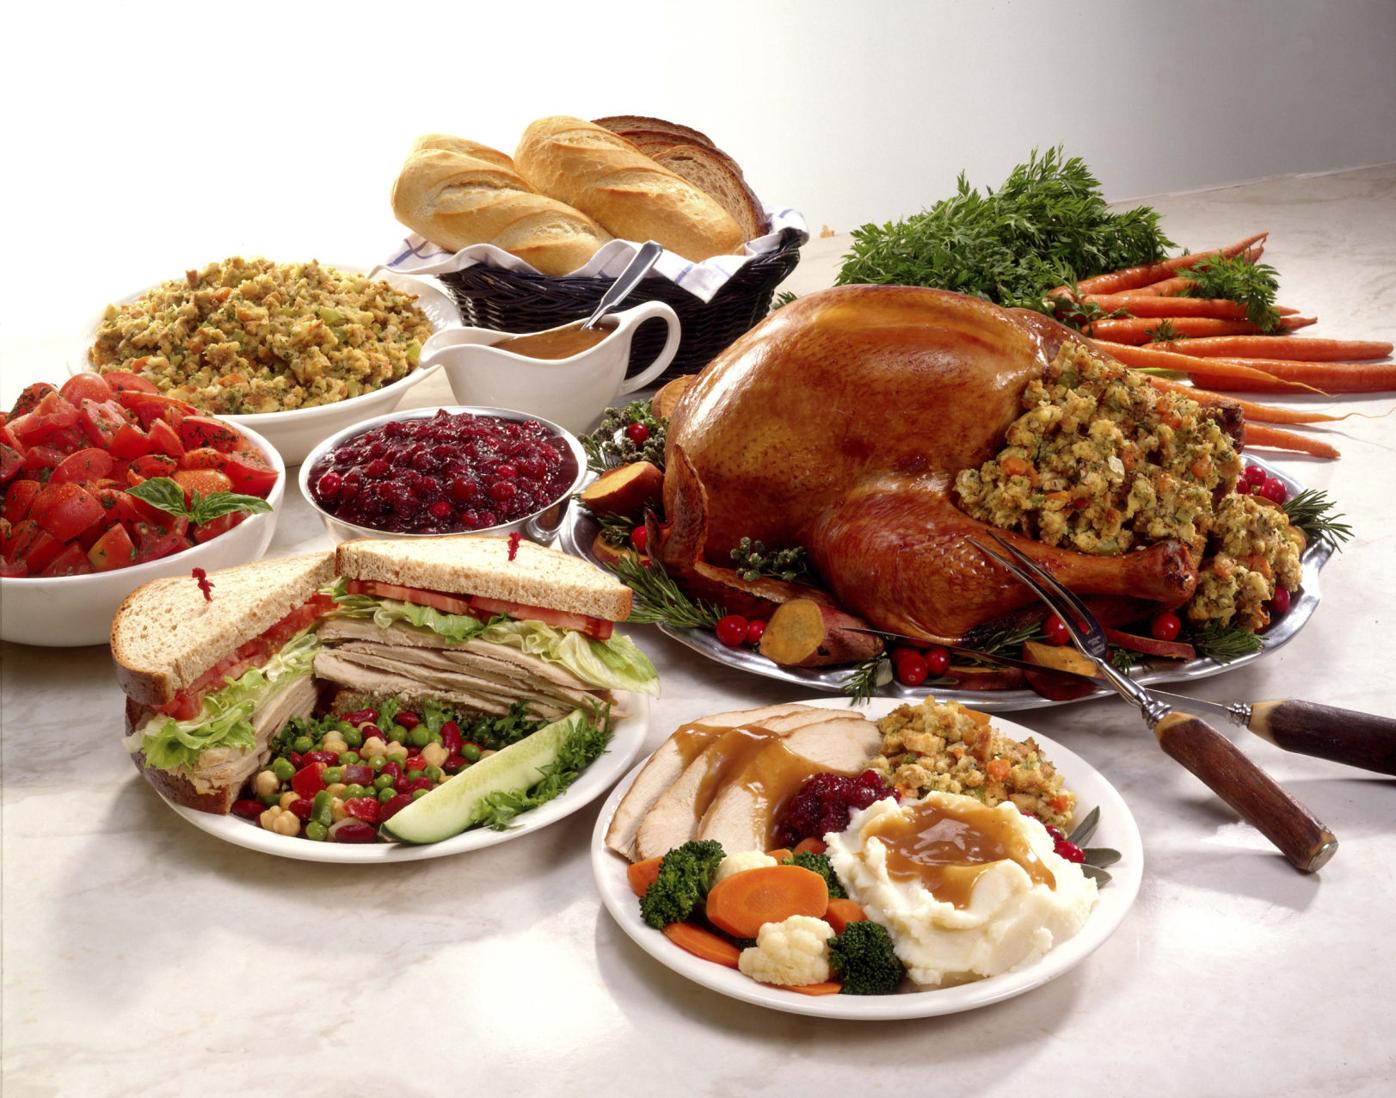 Less stress holiday; St. Andrew's offering side dishes, desserts for